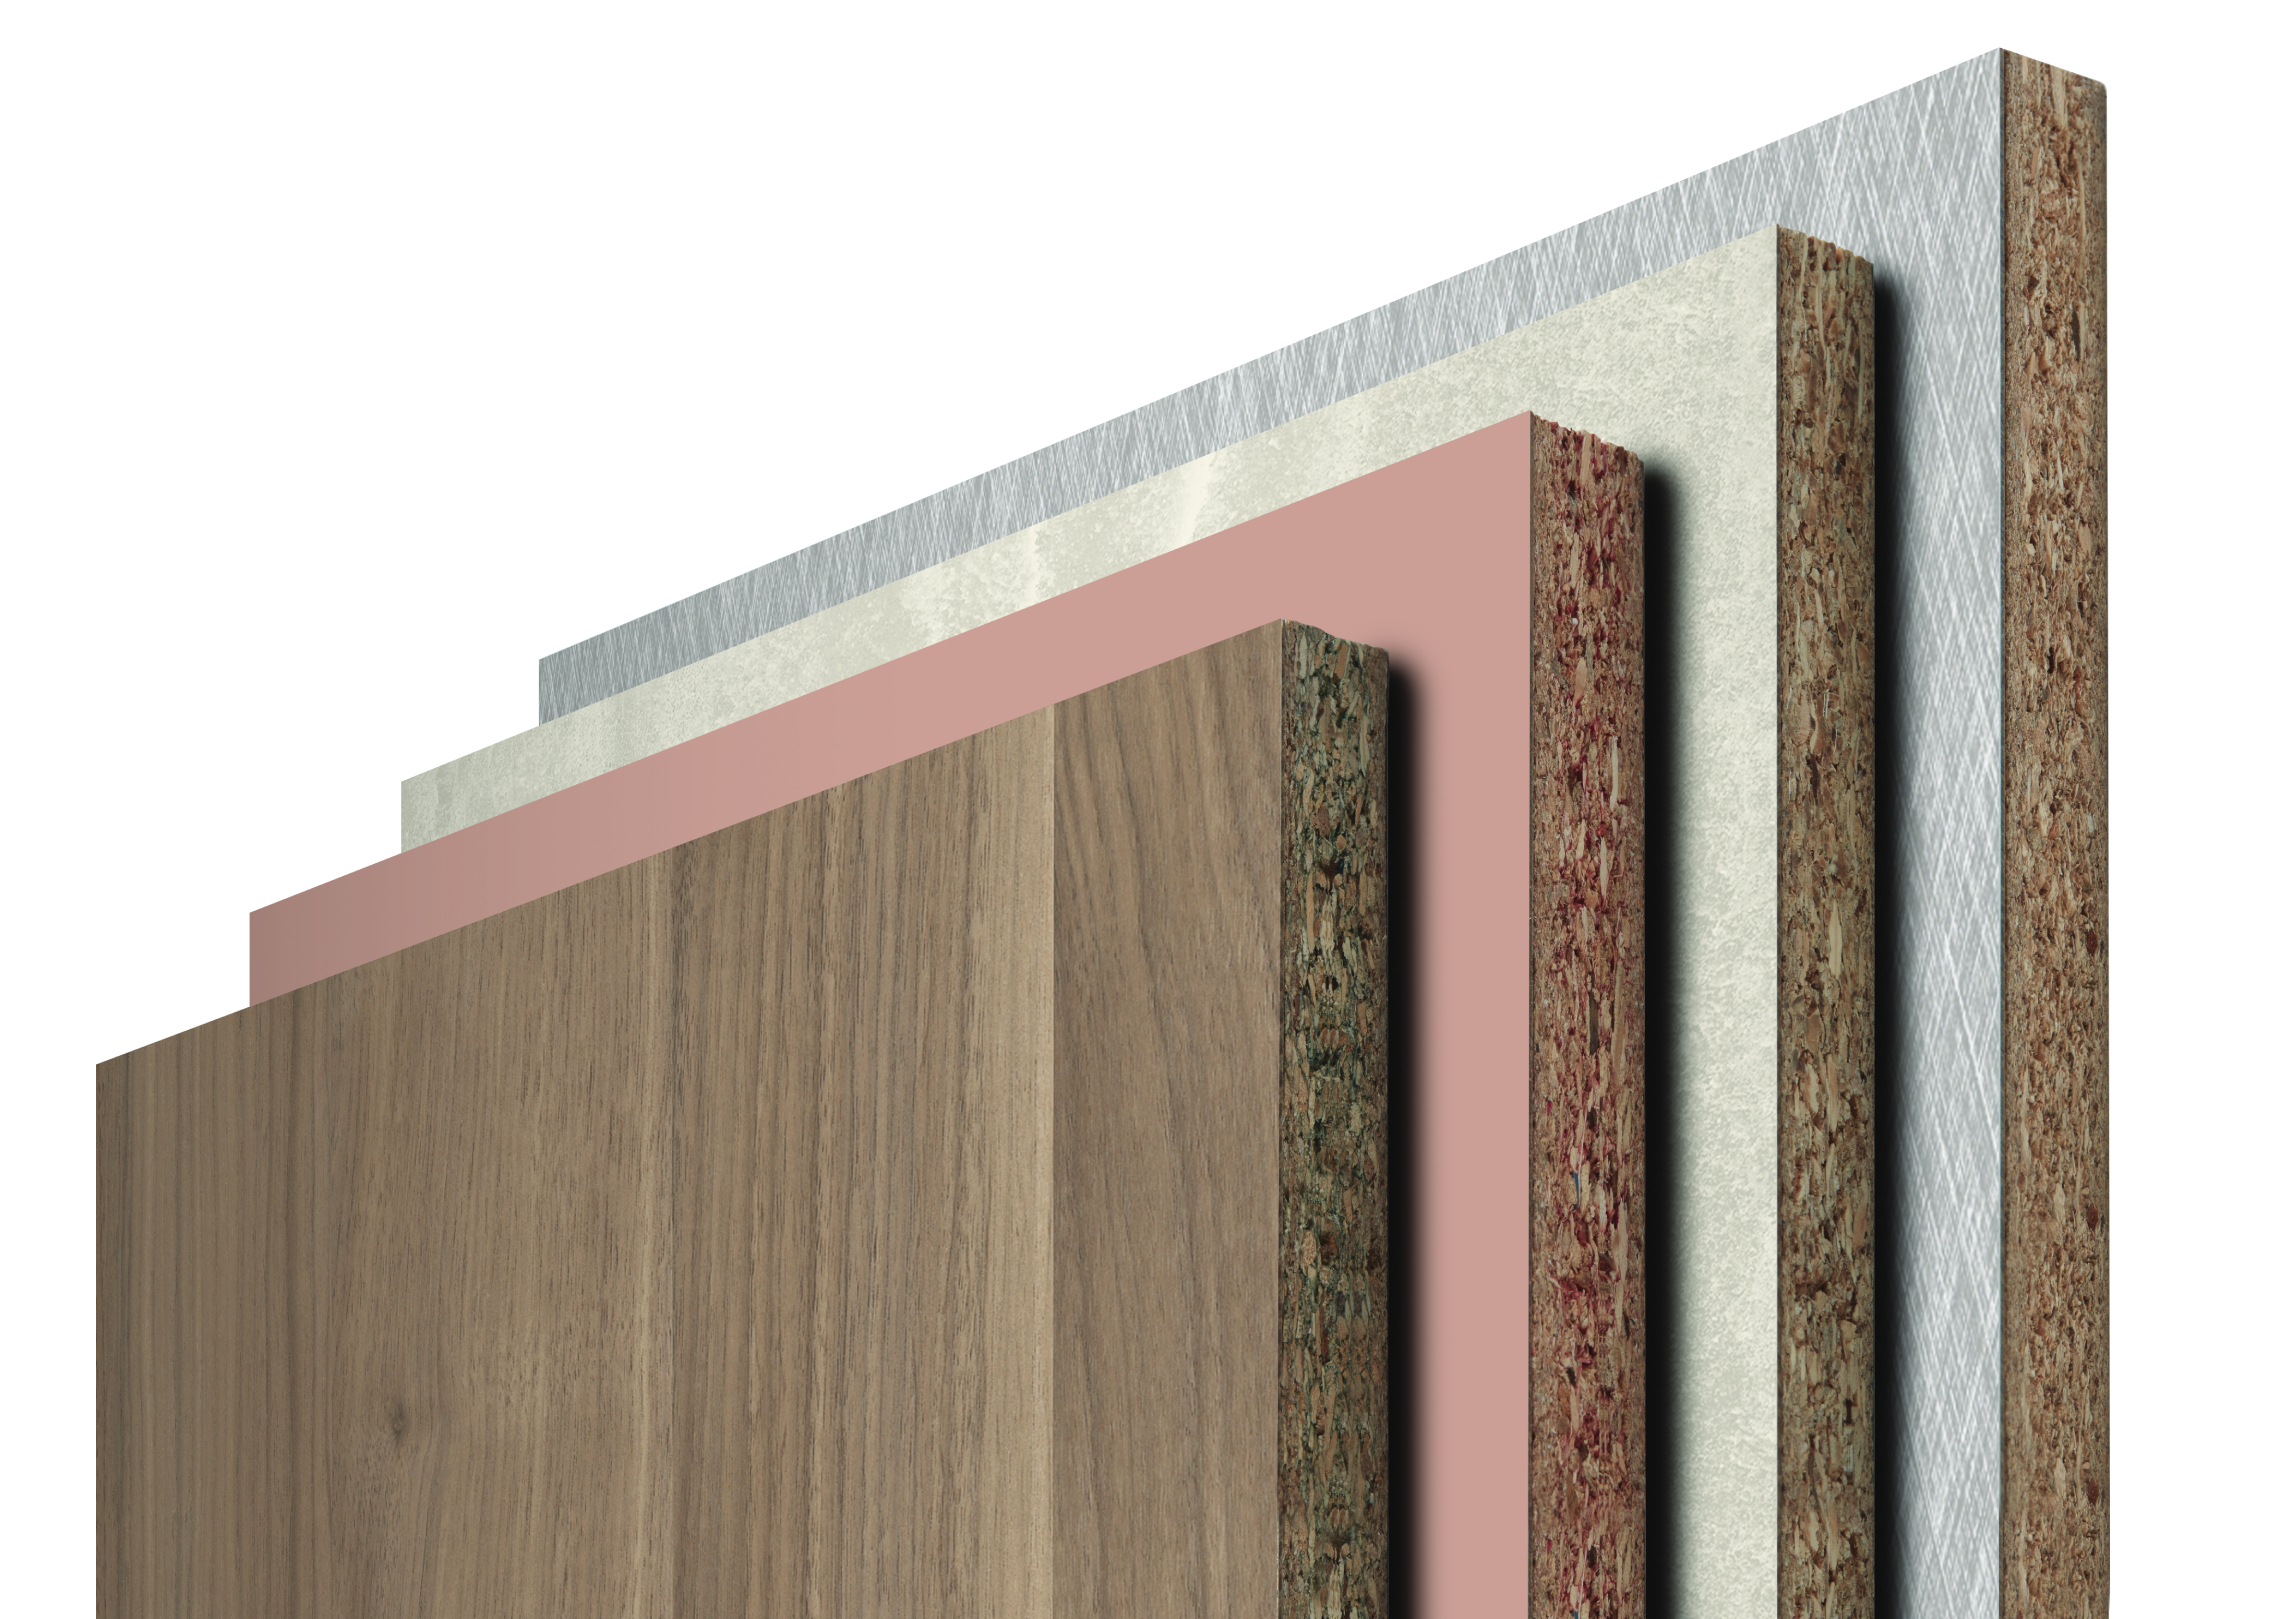 Decorative Surfaced Panel Particleboard (DP PB)